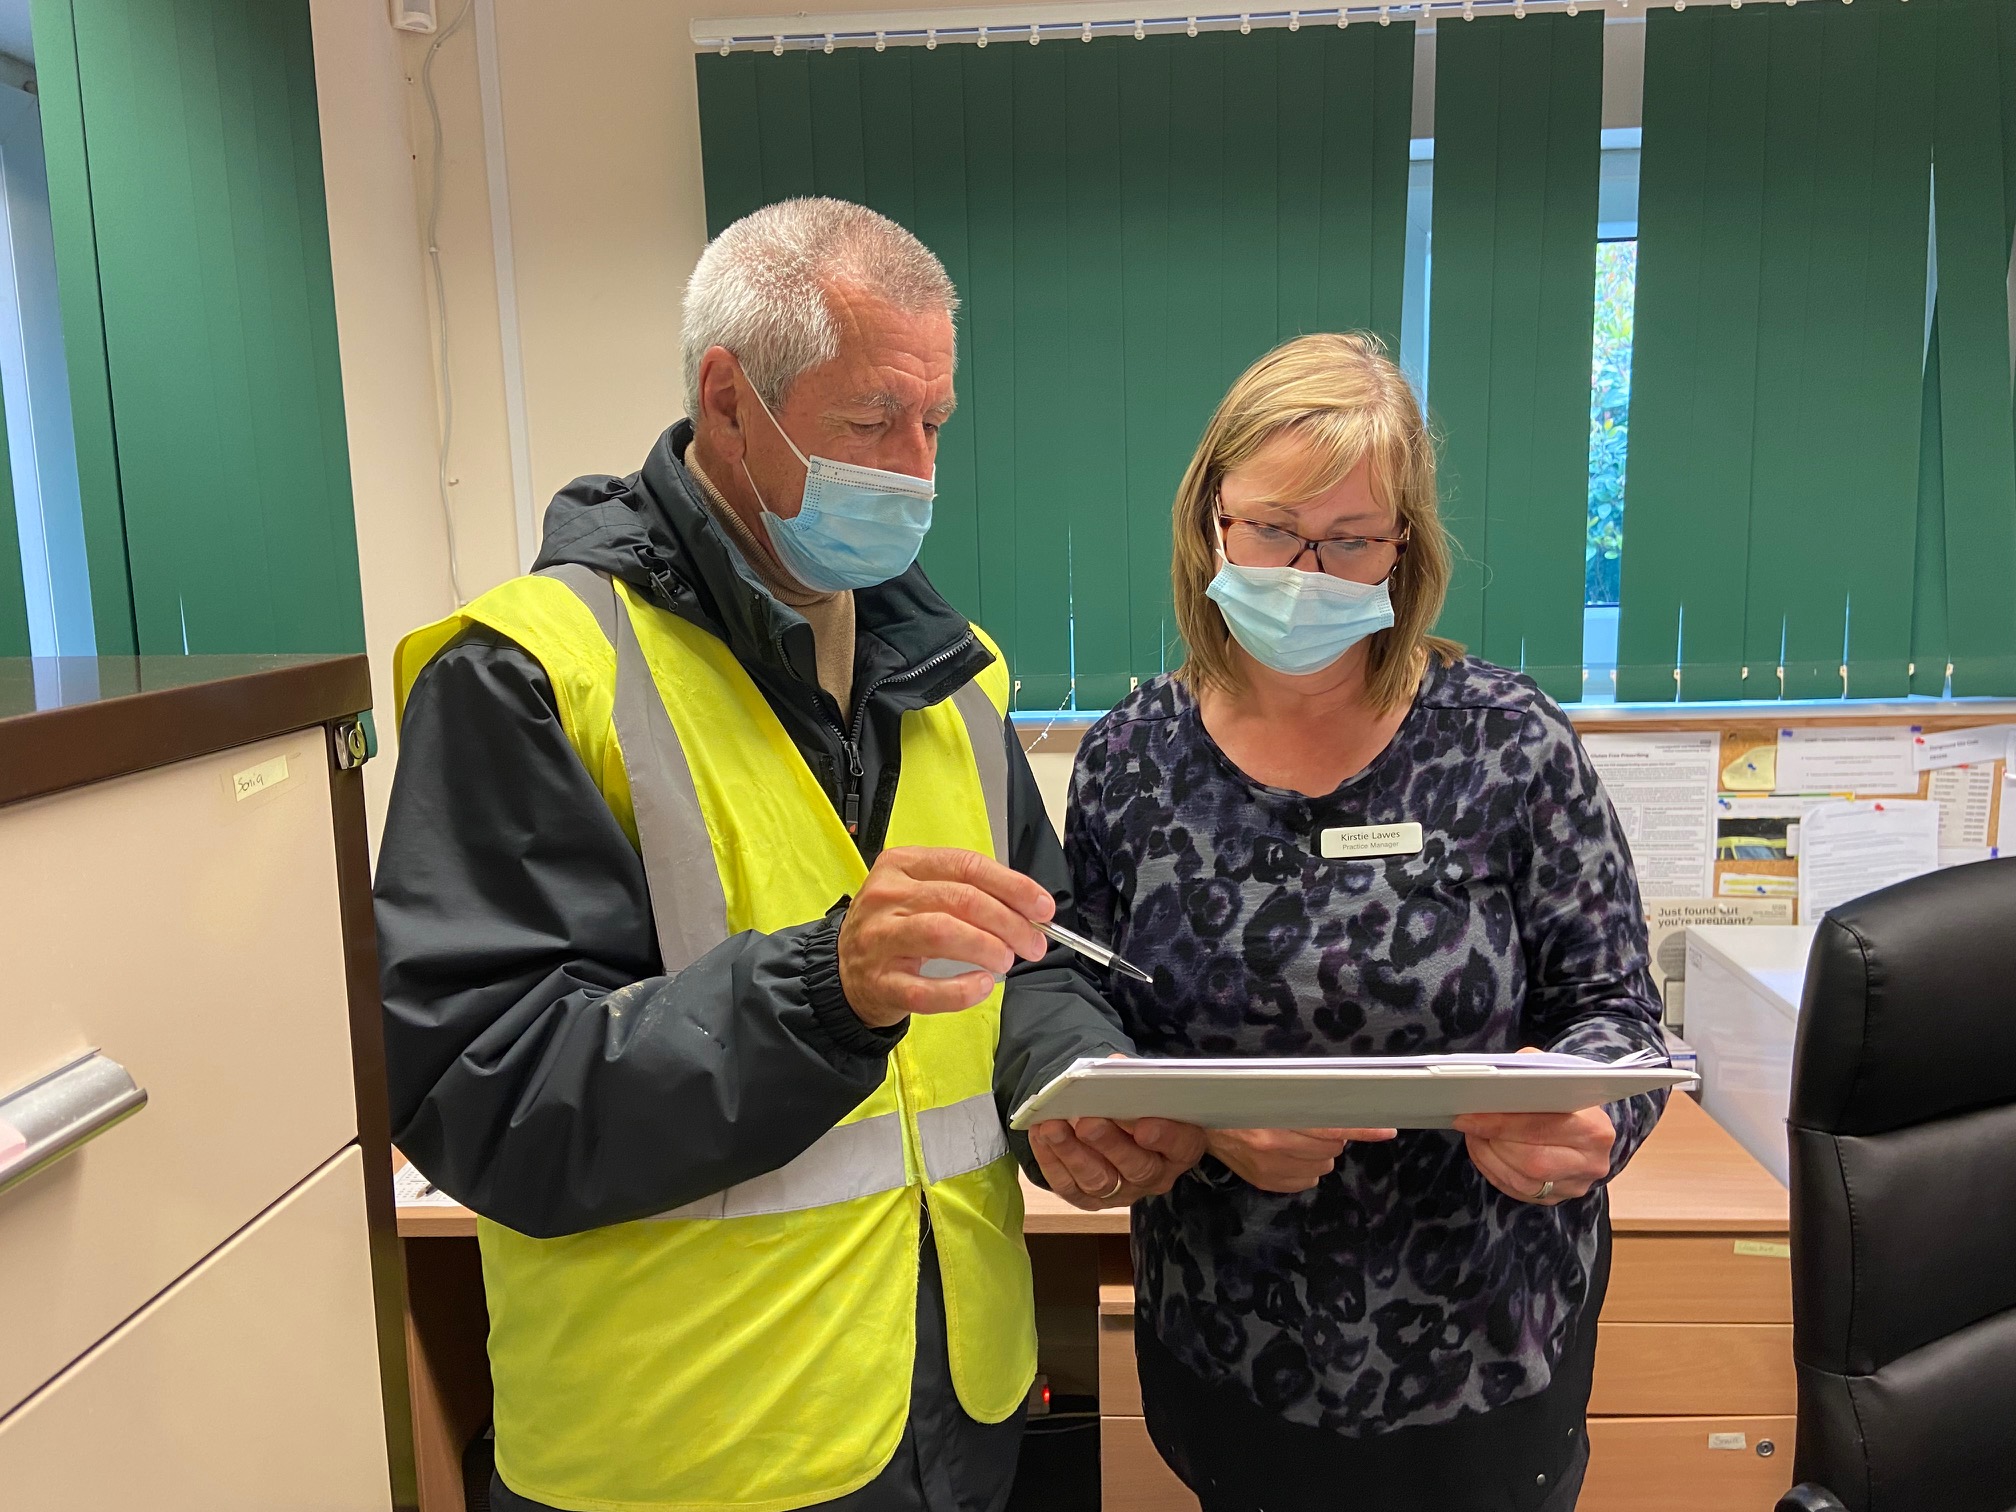 John Bufton discussing the vaccination procedures with the operations director